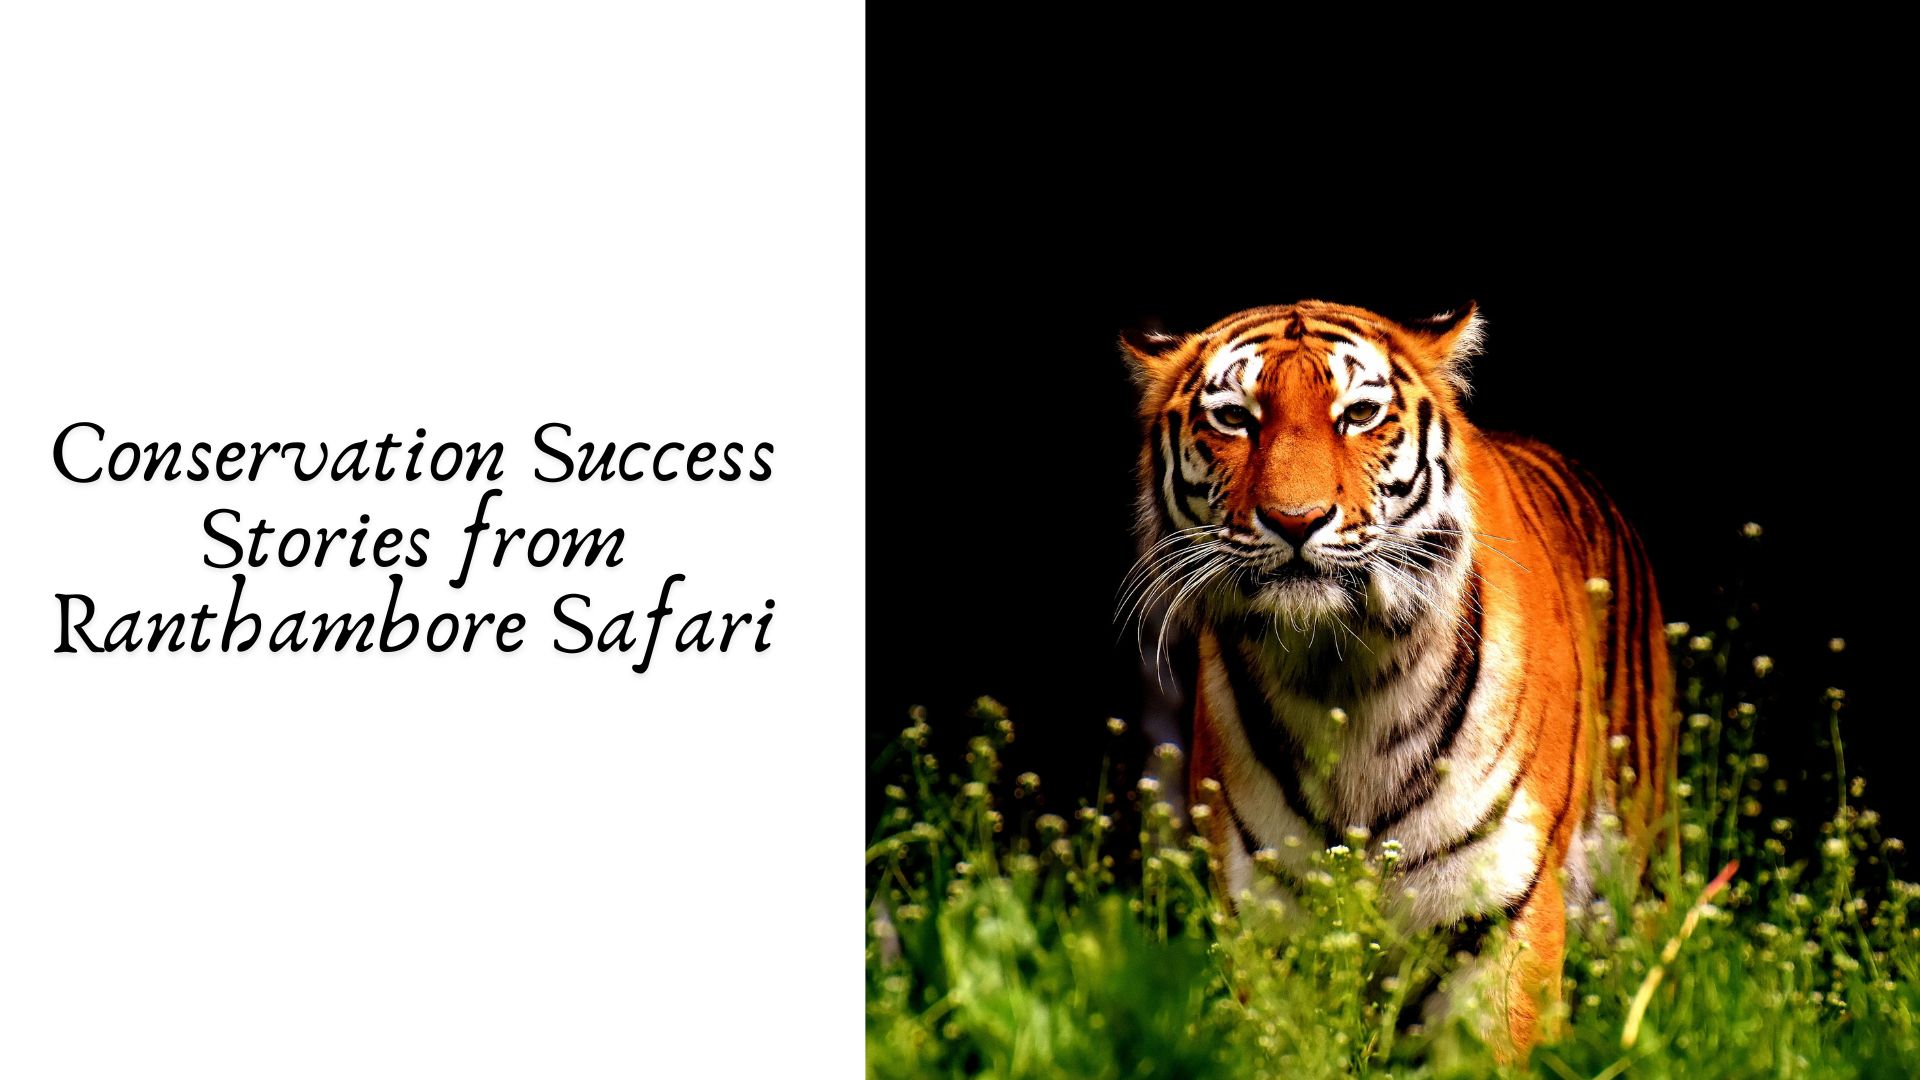 Conservation Success Stories from Ranthambore Safari